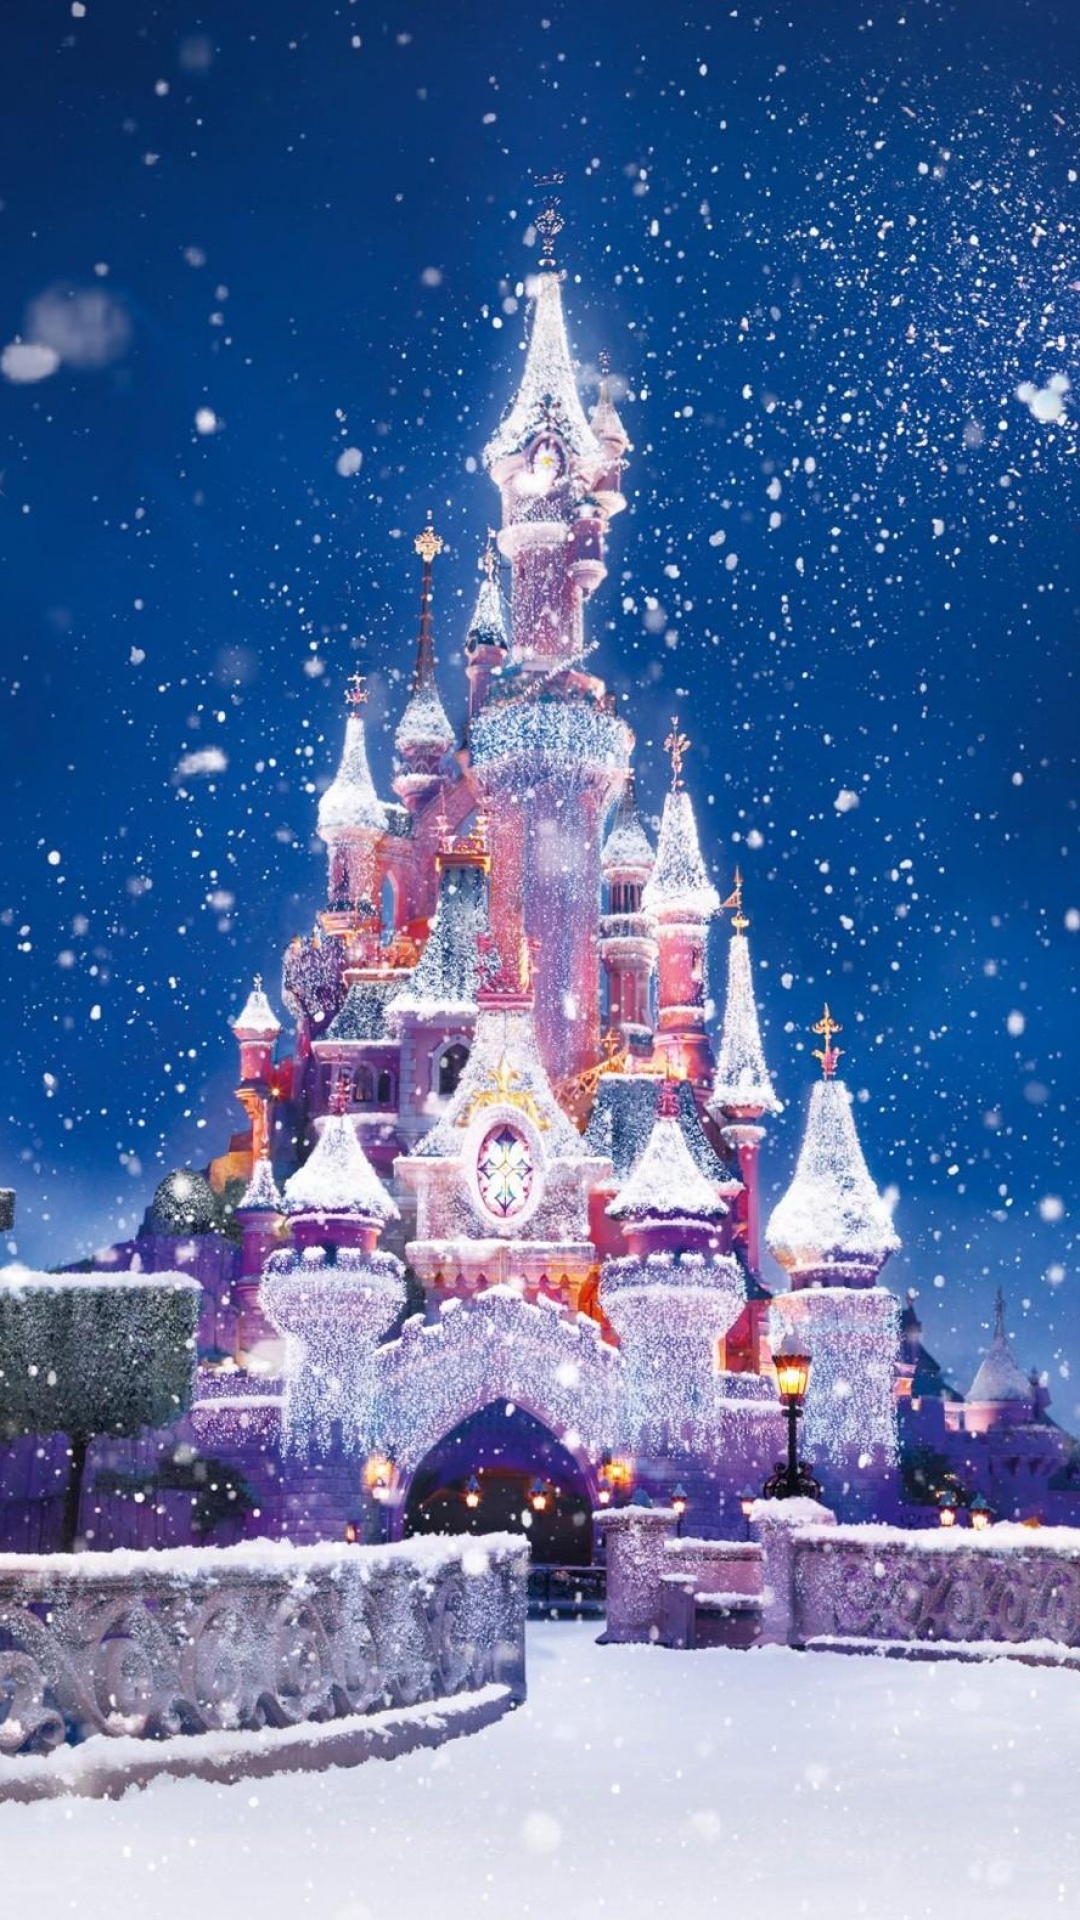 Disney Castle Christmas Lights Snow Android Wallpaper